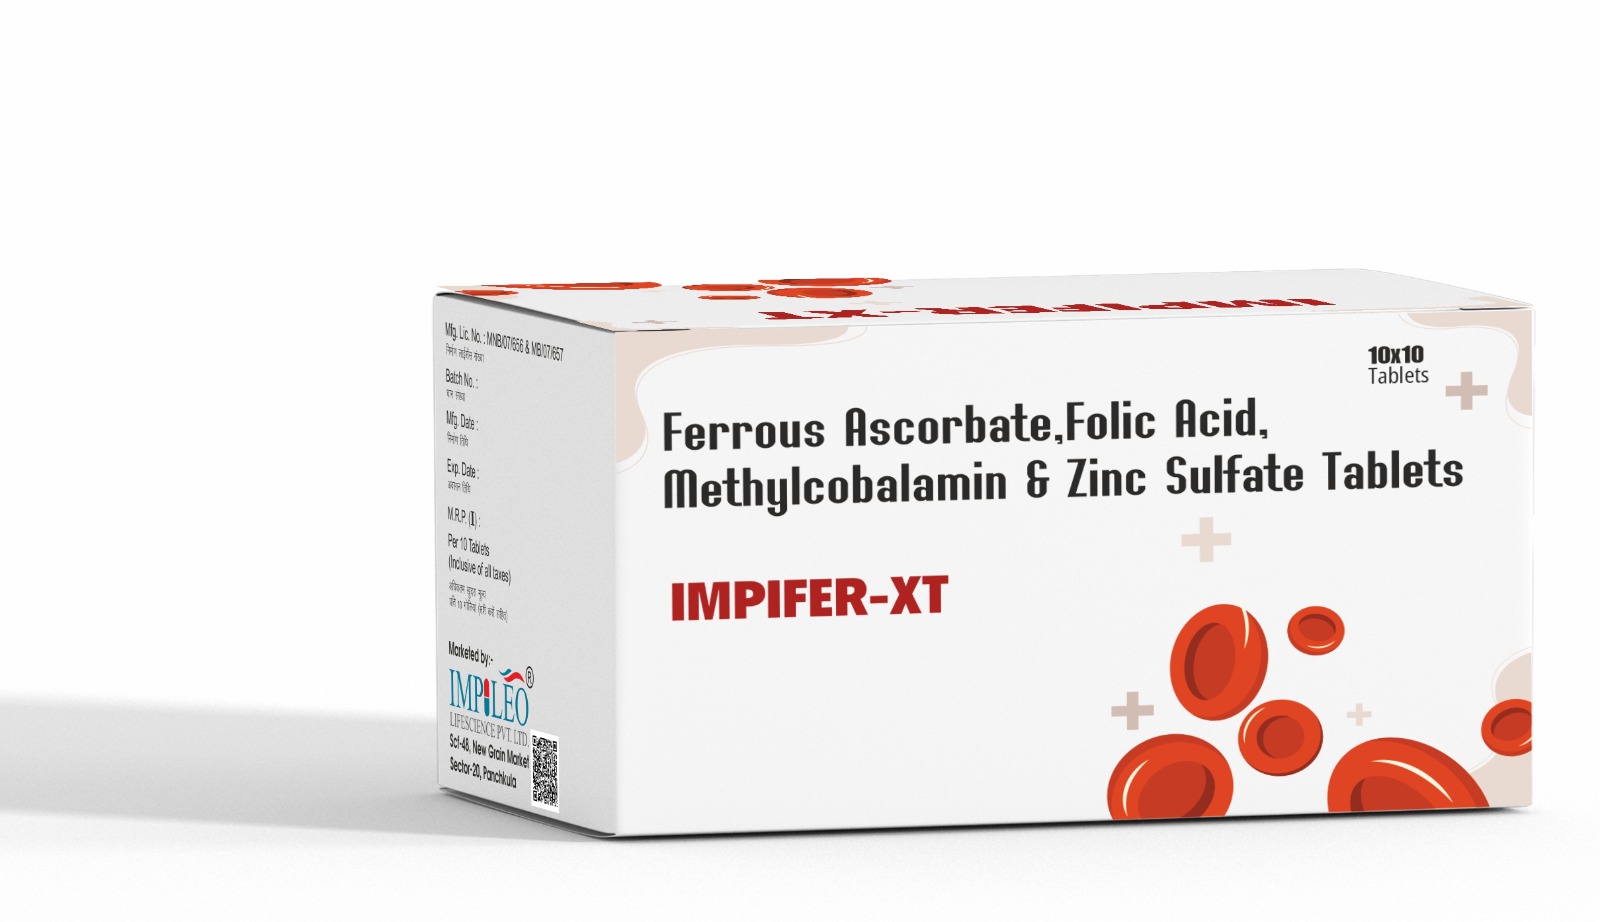 Top-Notch IMPIFER XT Tablets Now Available from Renowned PCD Pharma Franchise in Chandigarh